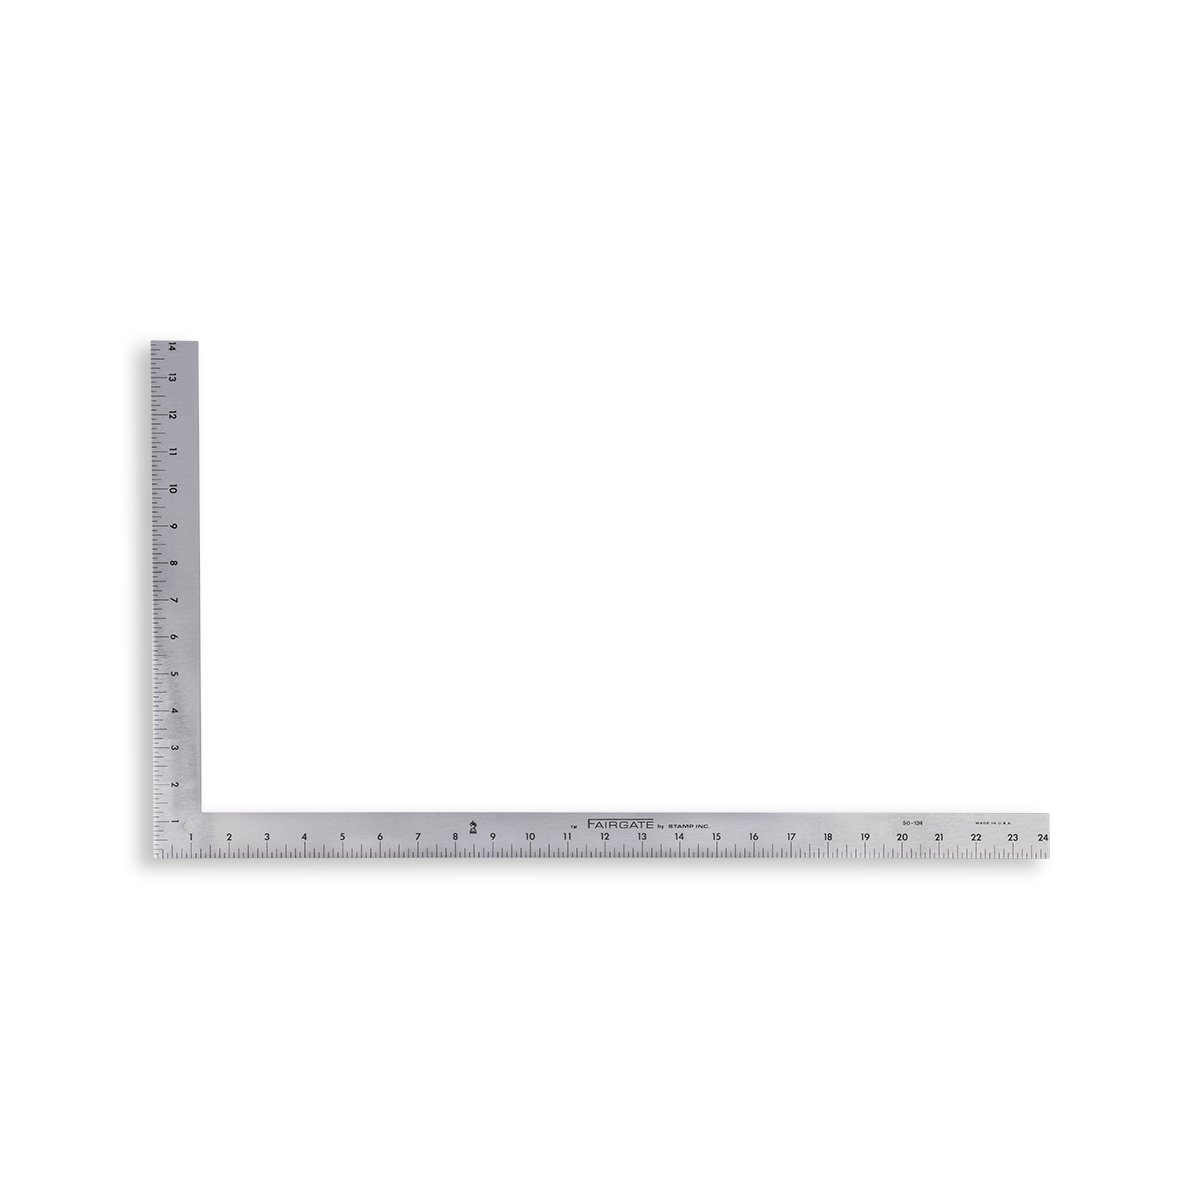 L- SQUARE RULER 24 [RL115] - $23.50 : American Sewing Supply, Pay Less, Buy  More